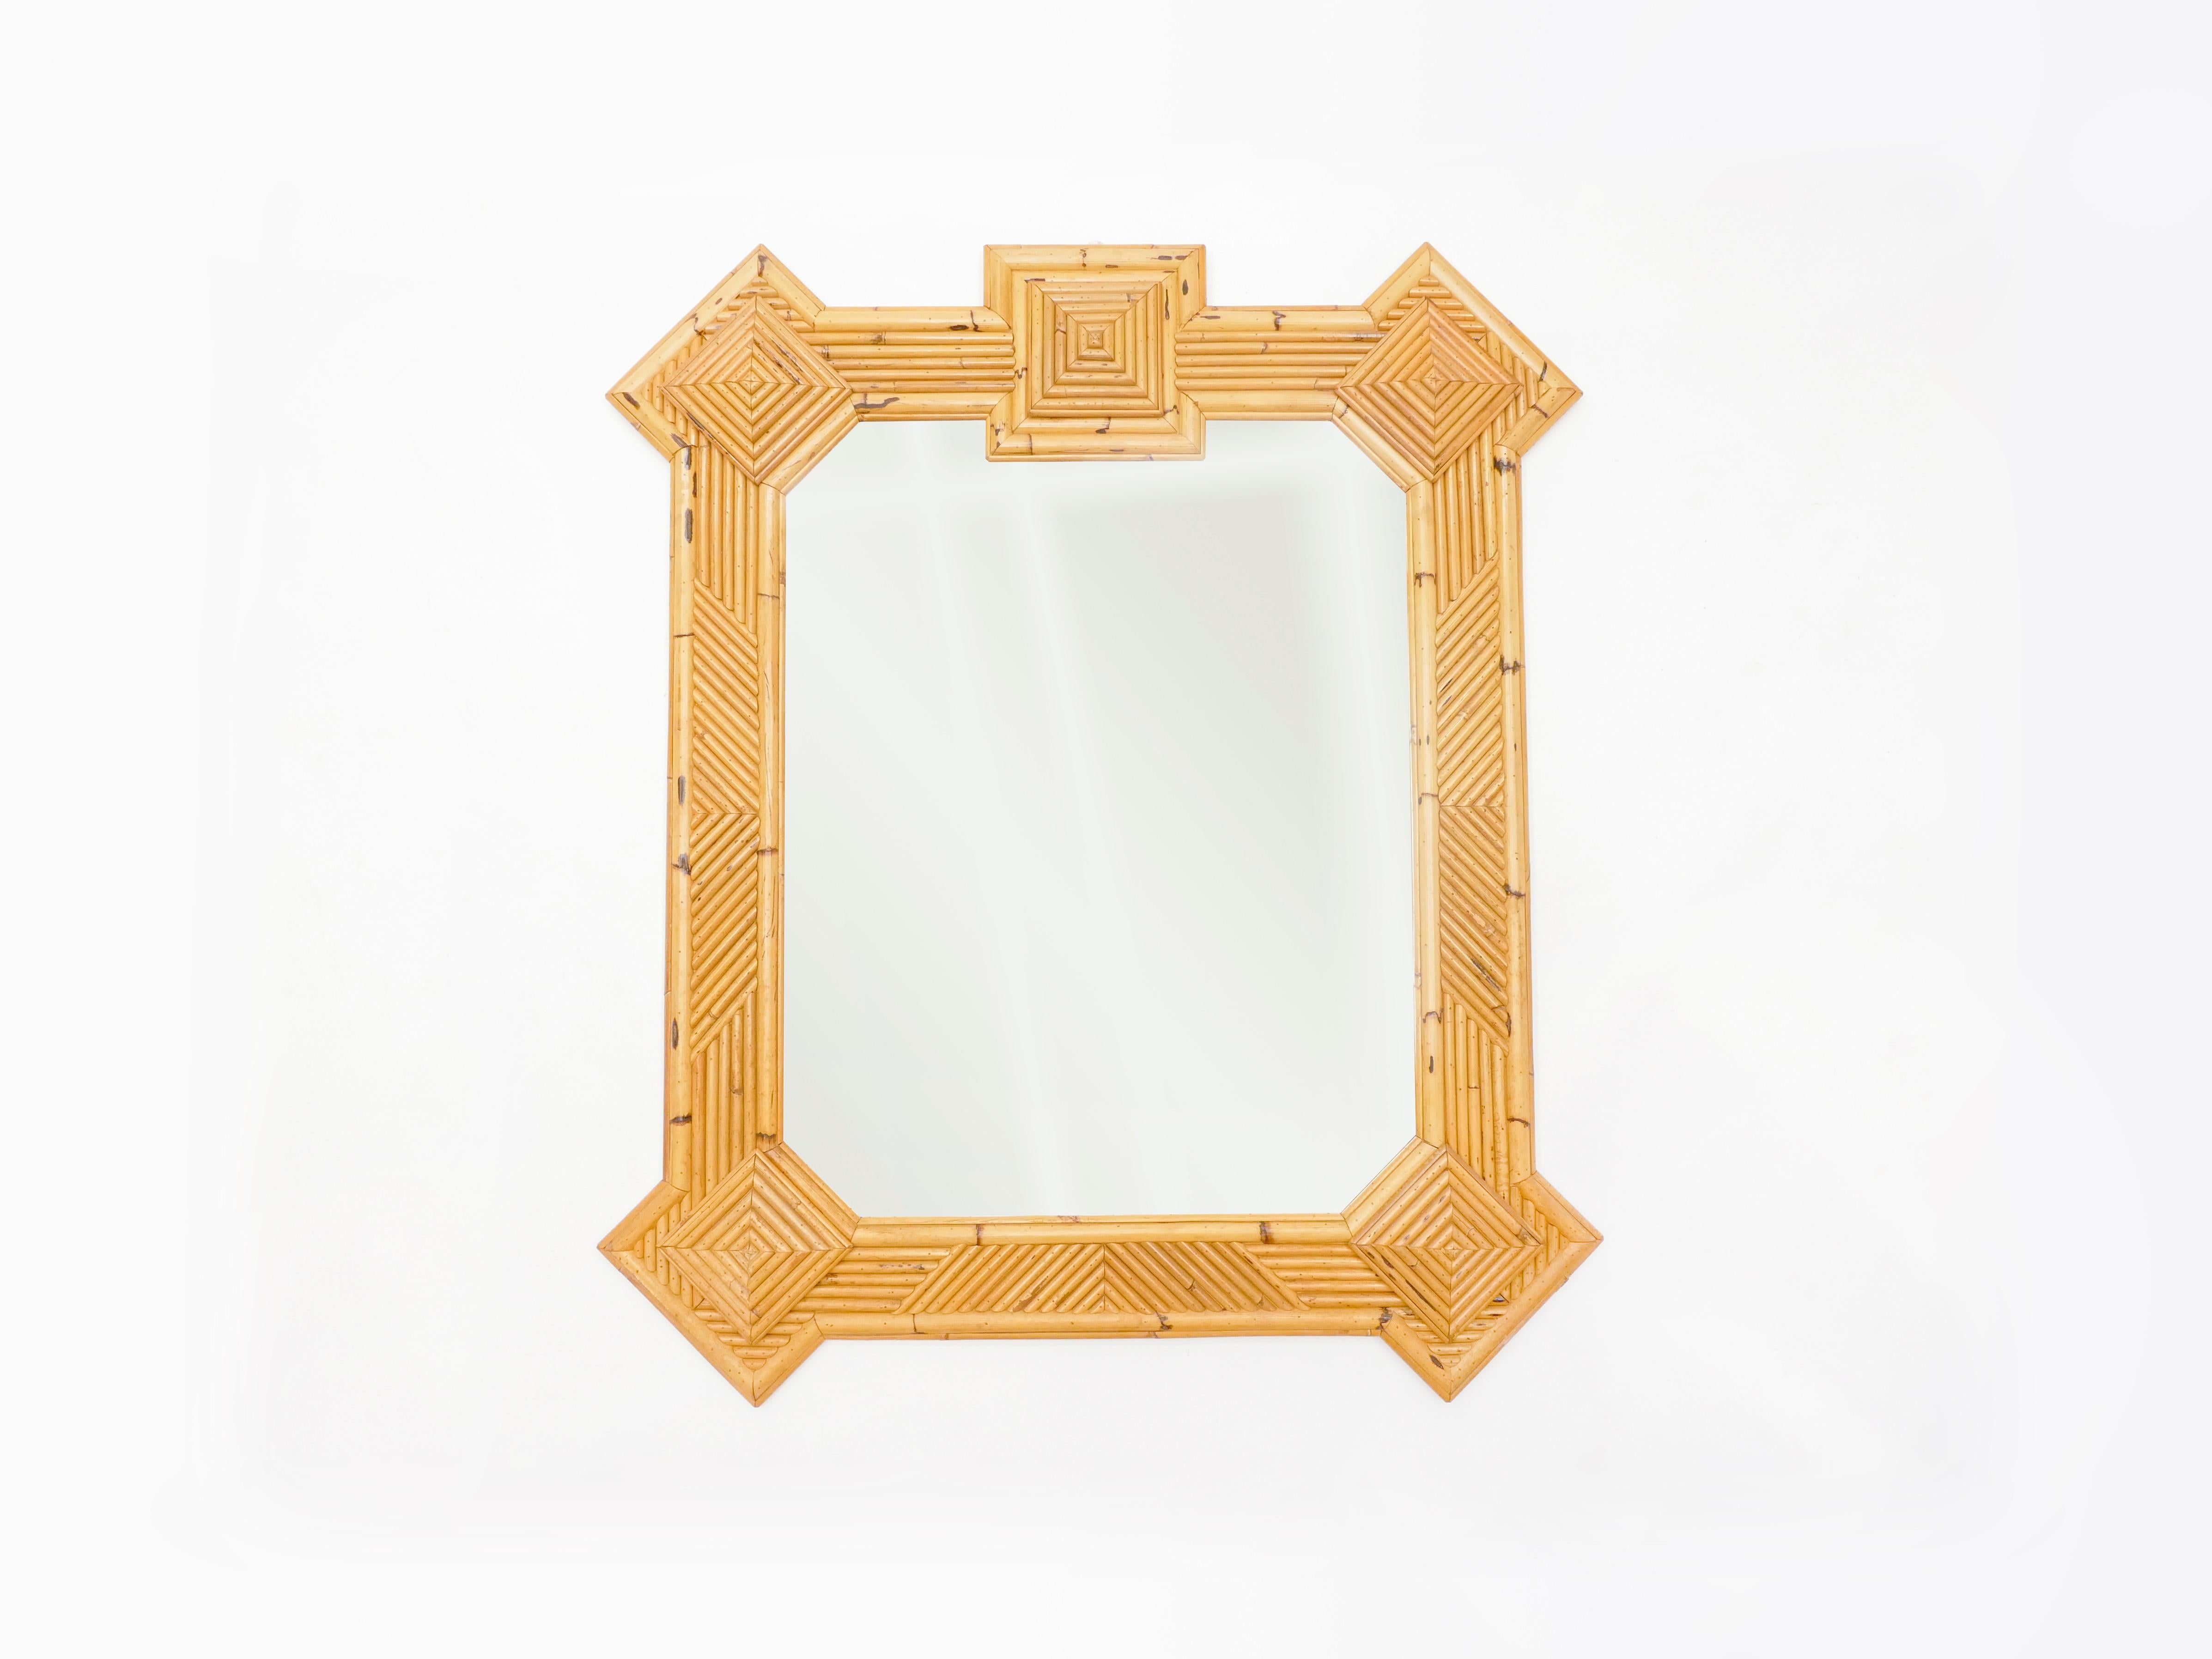 This extra large mirror was designed by Maurizio Mariani for Vivai Del Sud in Roma in the early 1970s. It mixes rattan, bamboo and cane from India, making this decorative frame entirely handmade quite unique and beautiful. Vivai Del Sud was a